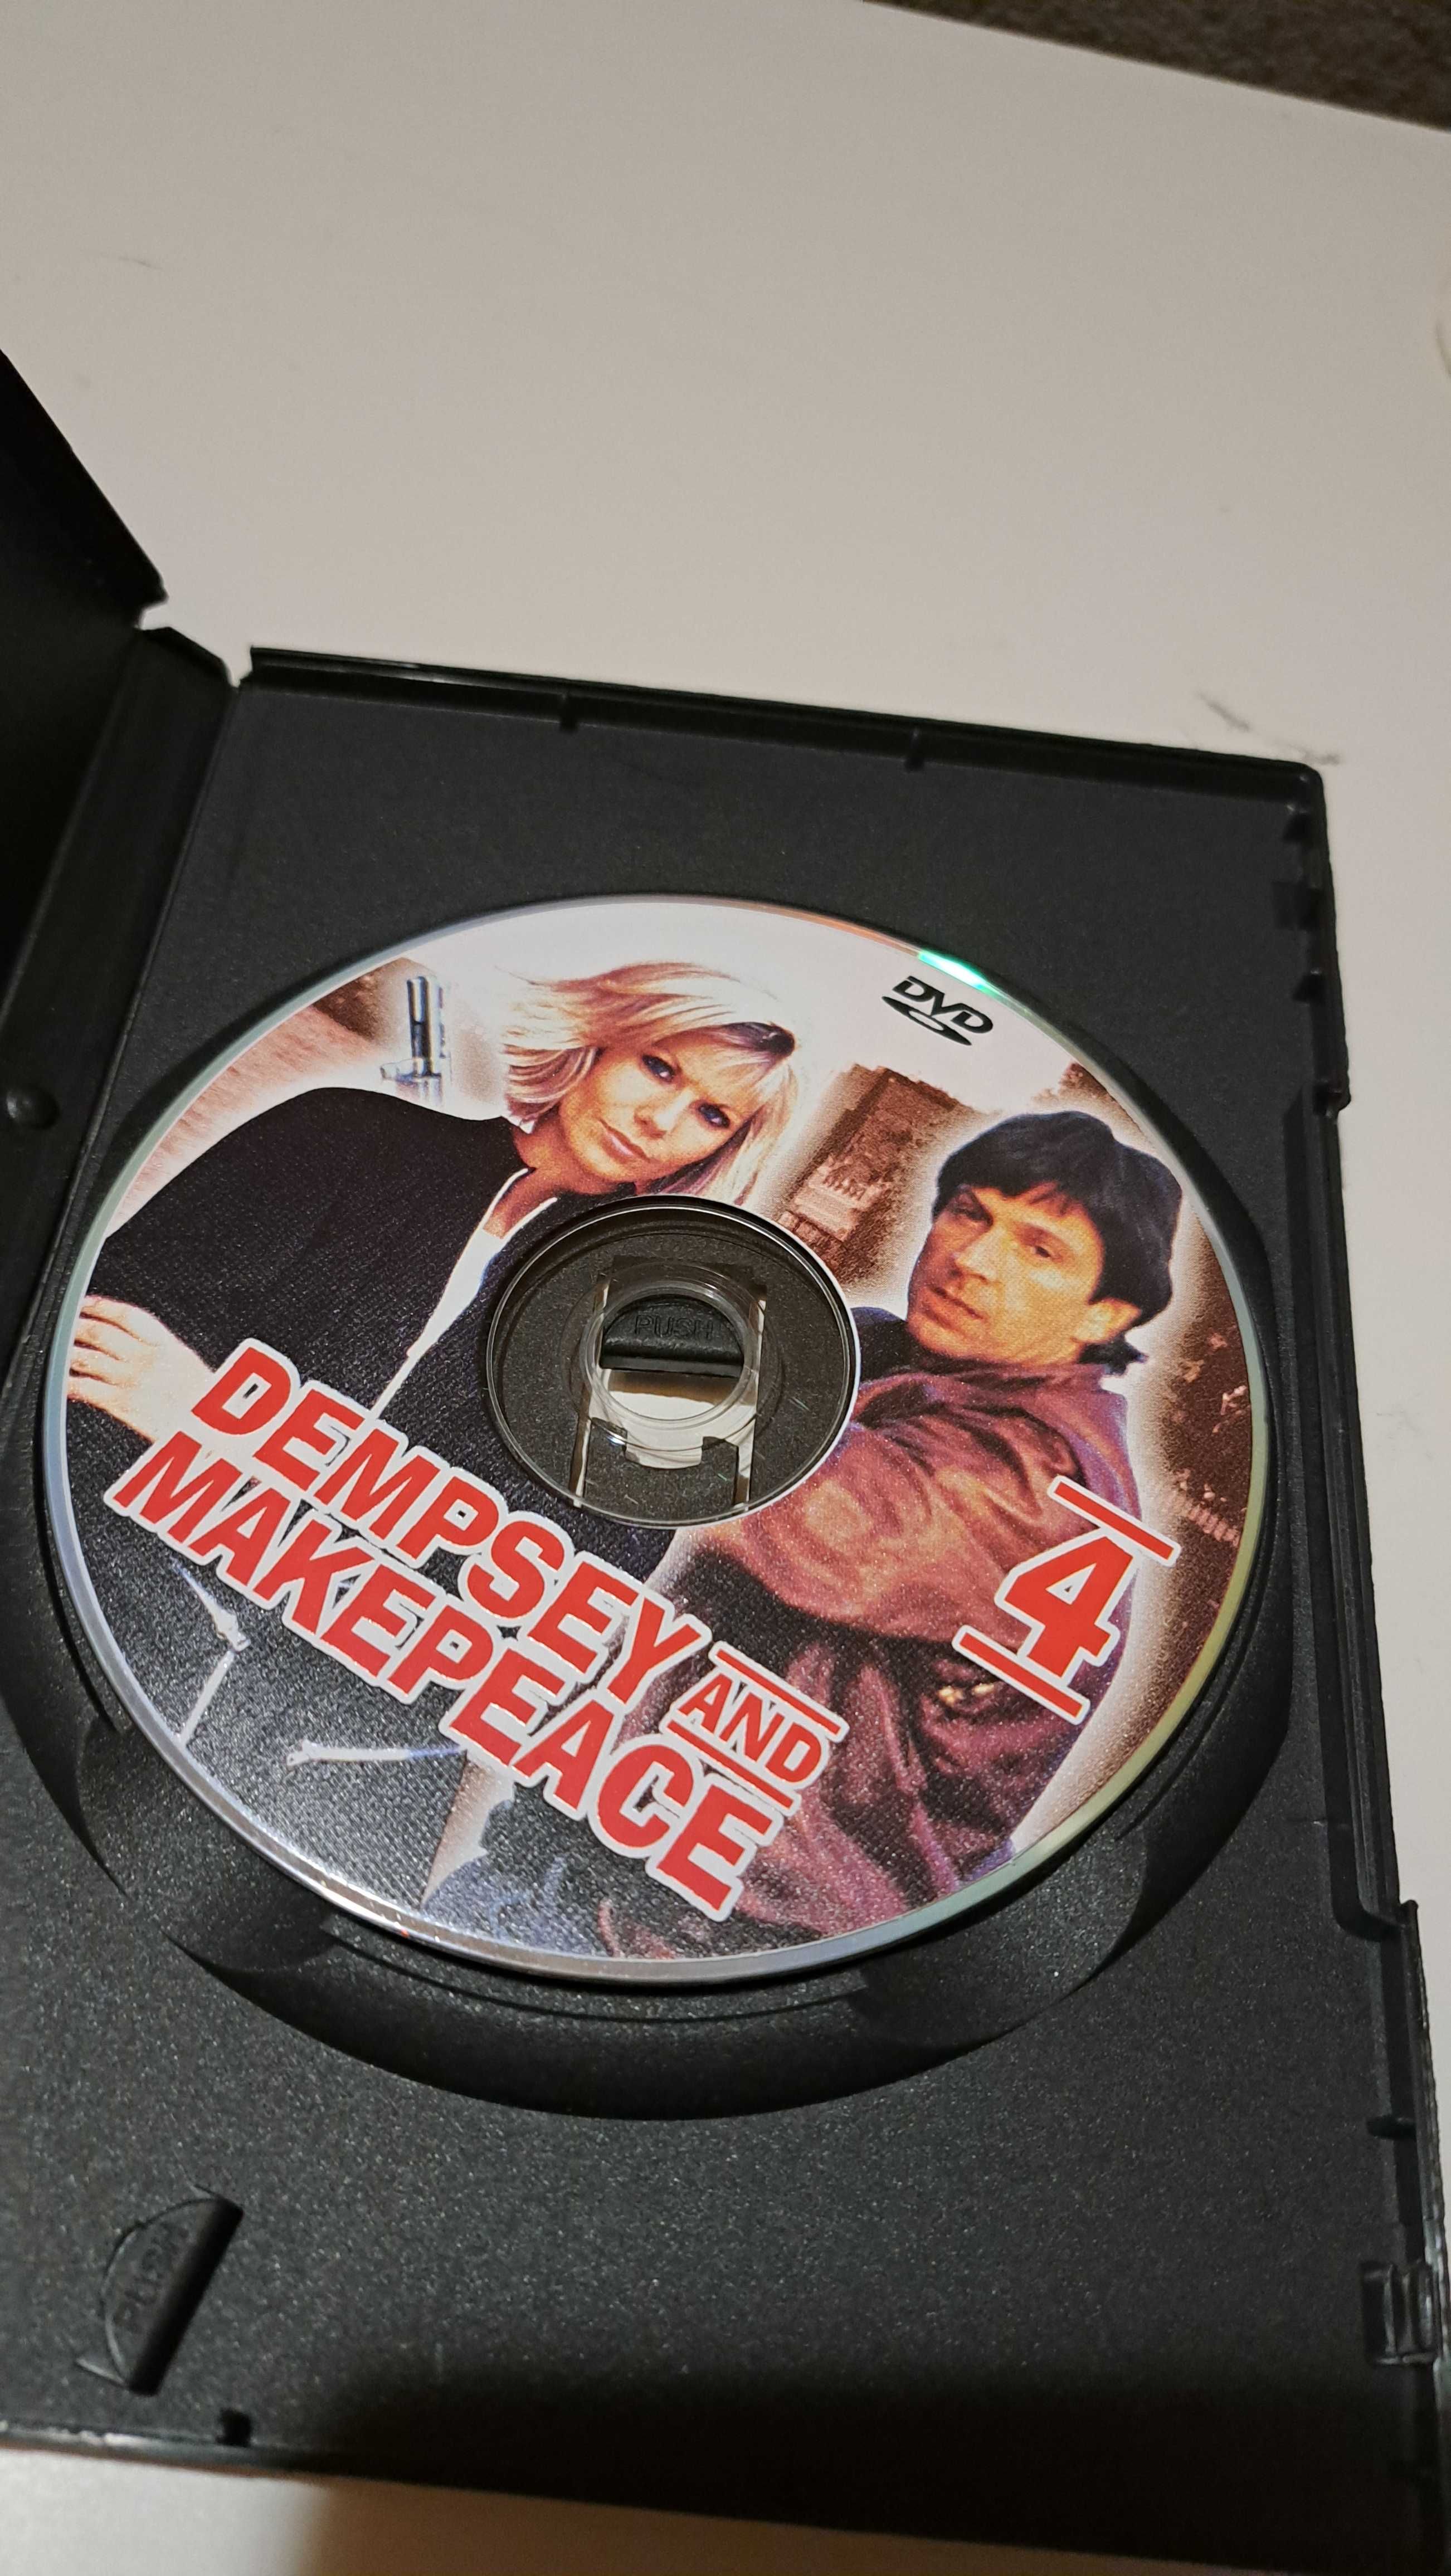 Dempsey and Makepeace 4 i 9 DVD